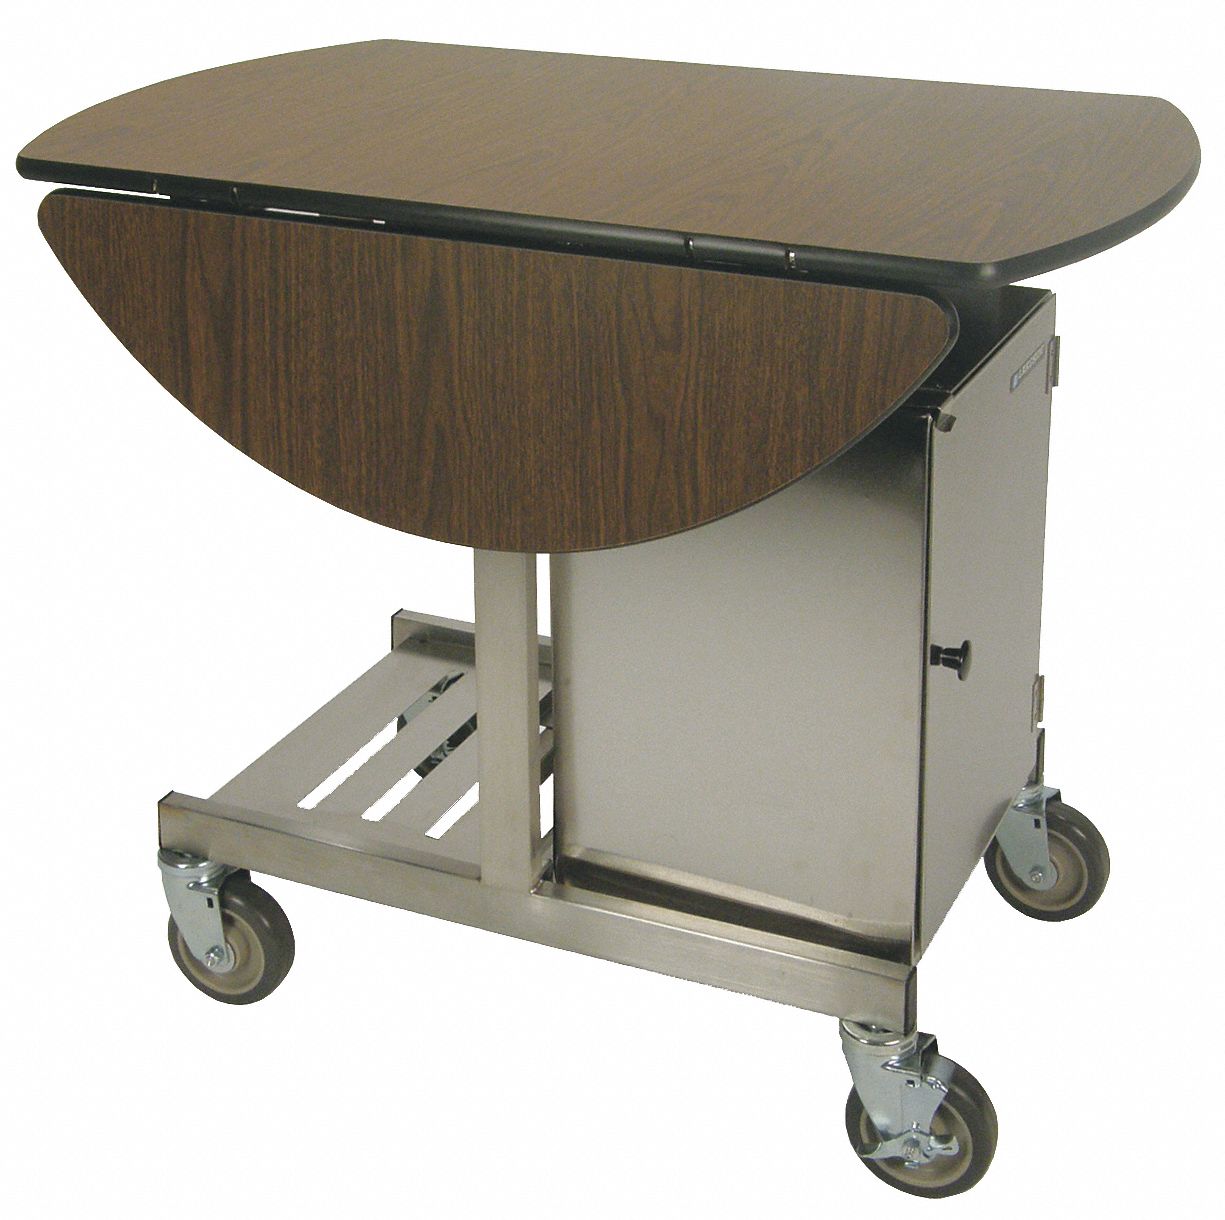 39T788 - Tri-Fold Room Service Table Oval 36 In